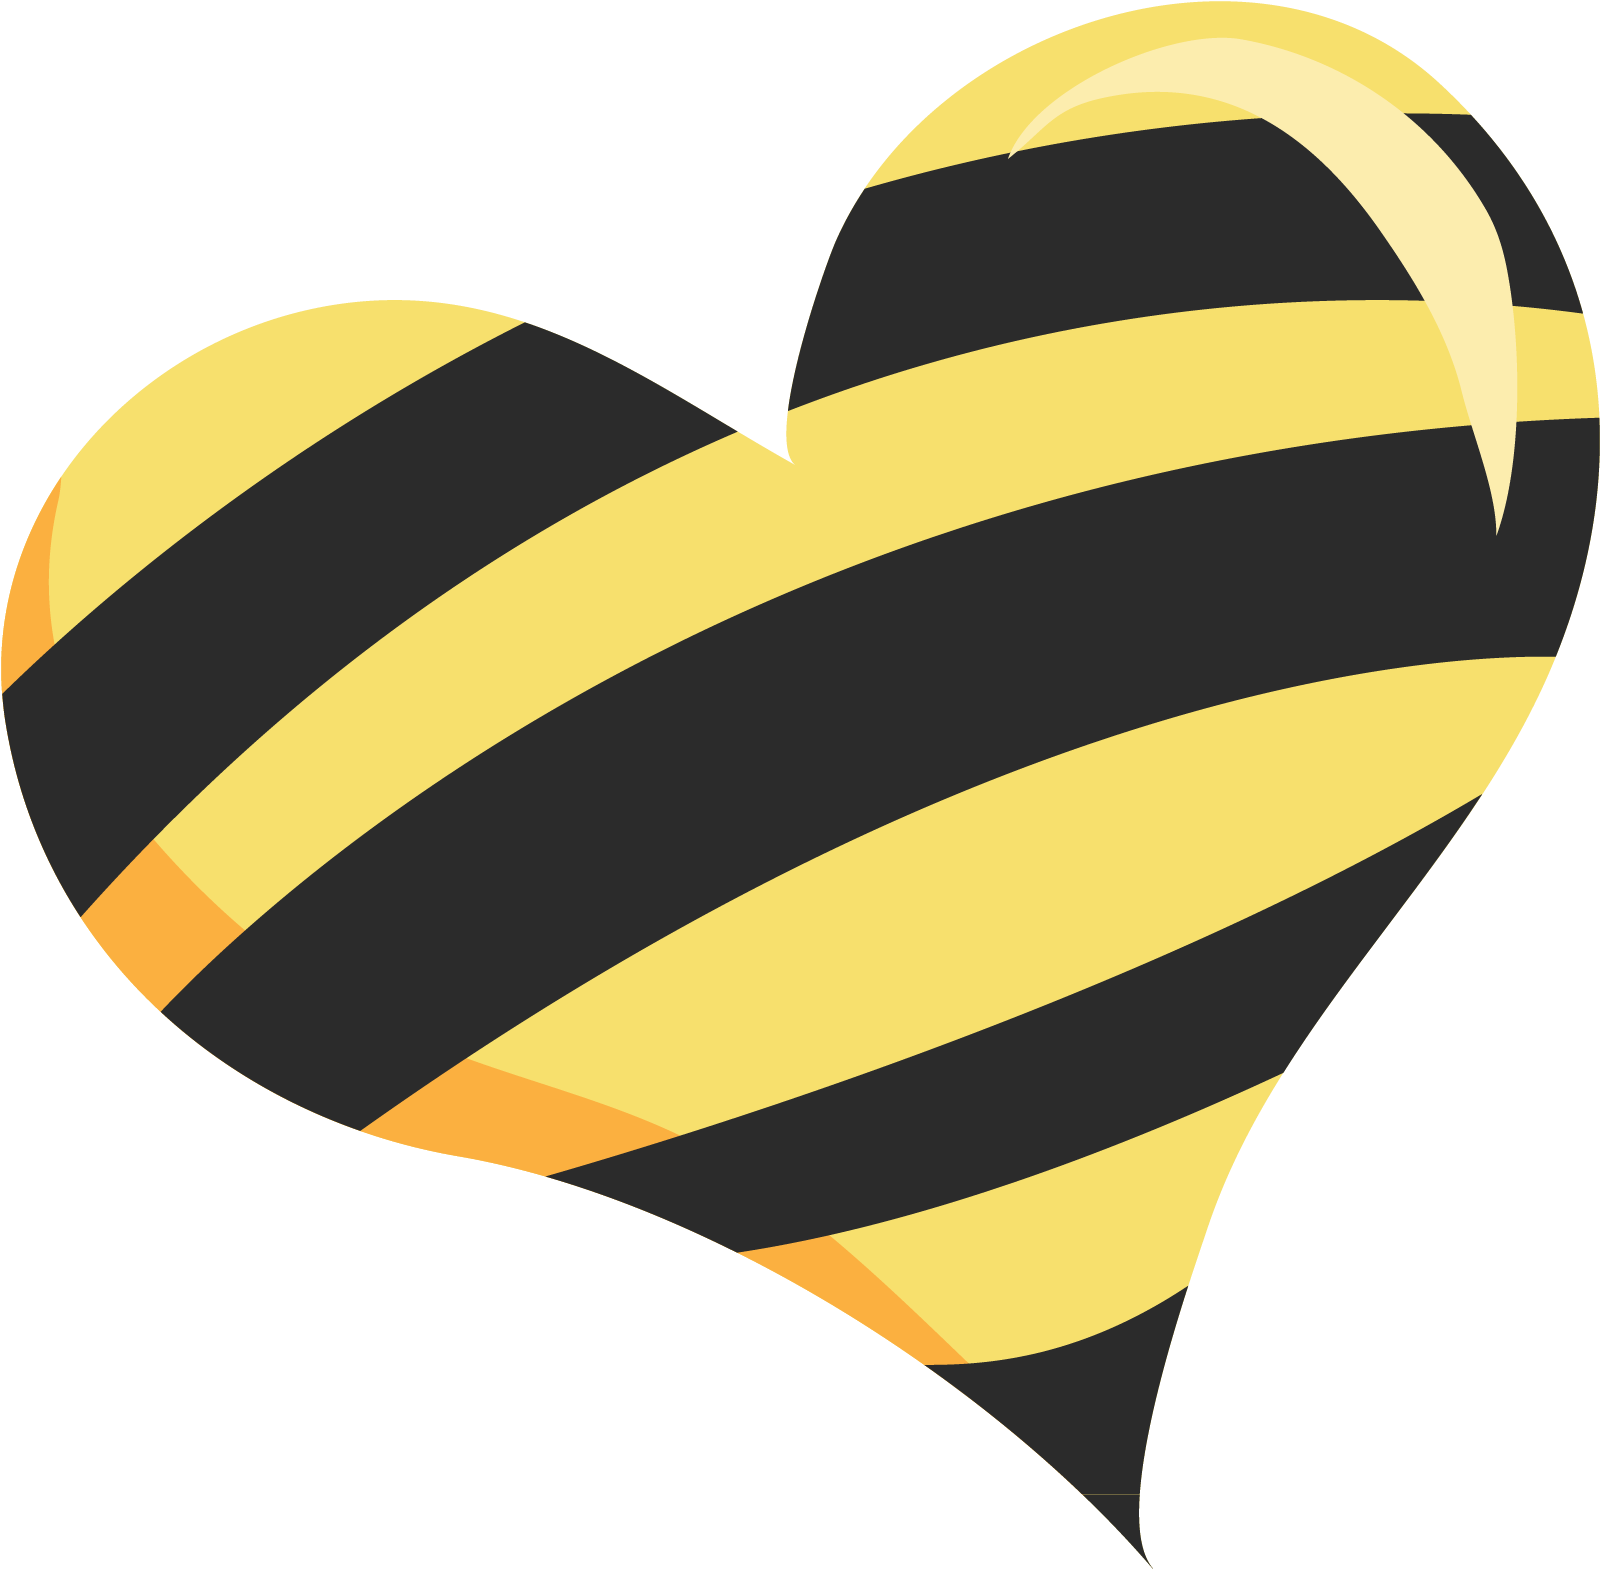 Craft - Bee With Hearts (1800x1800)